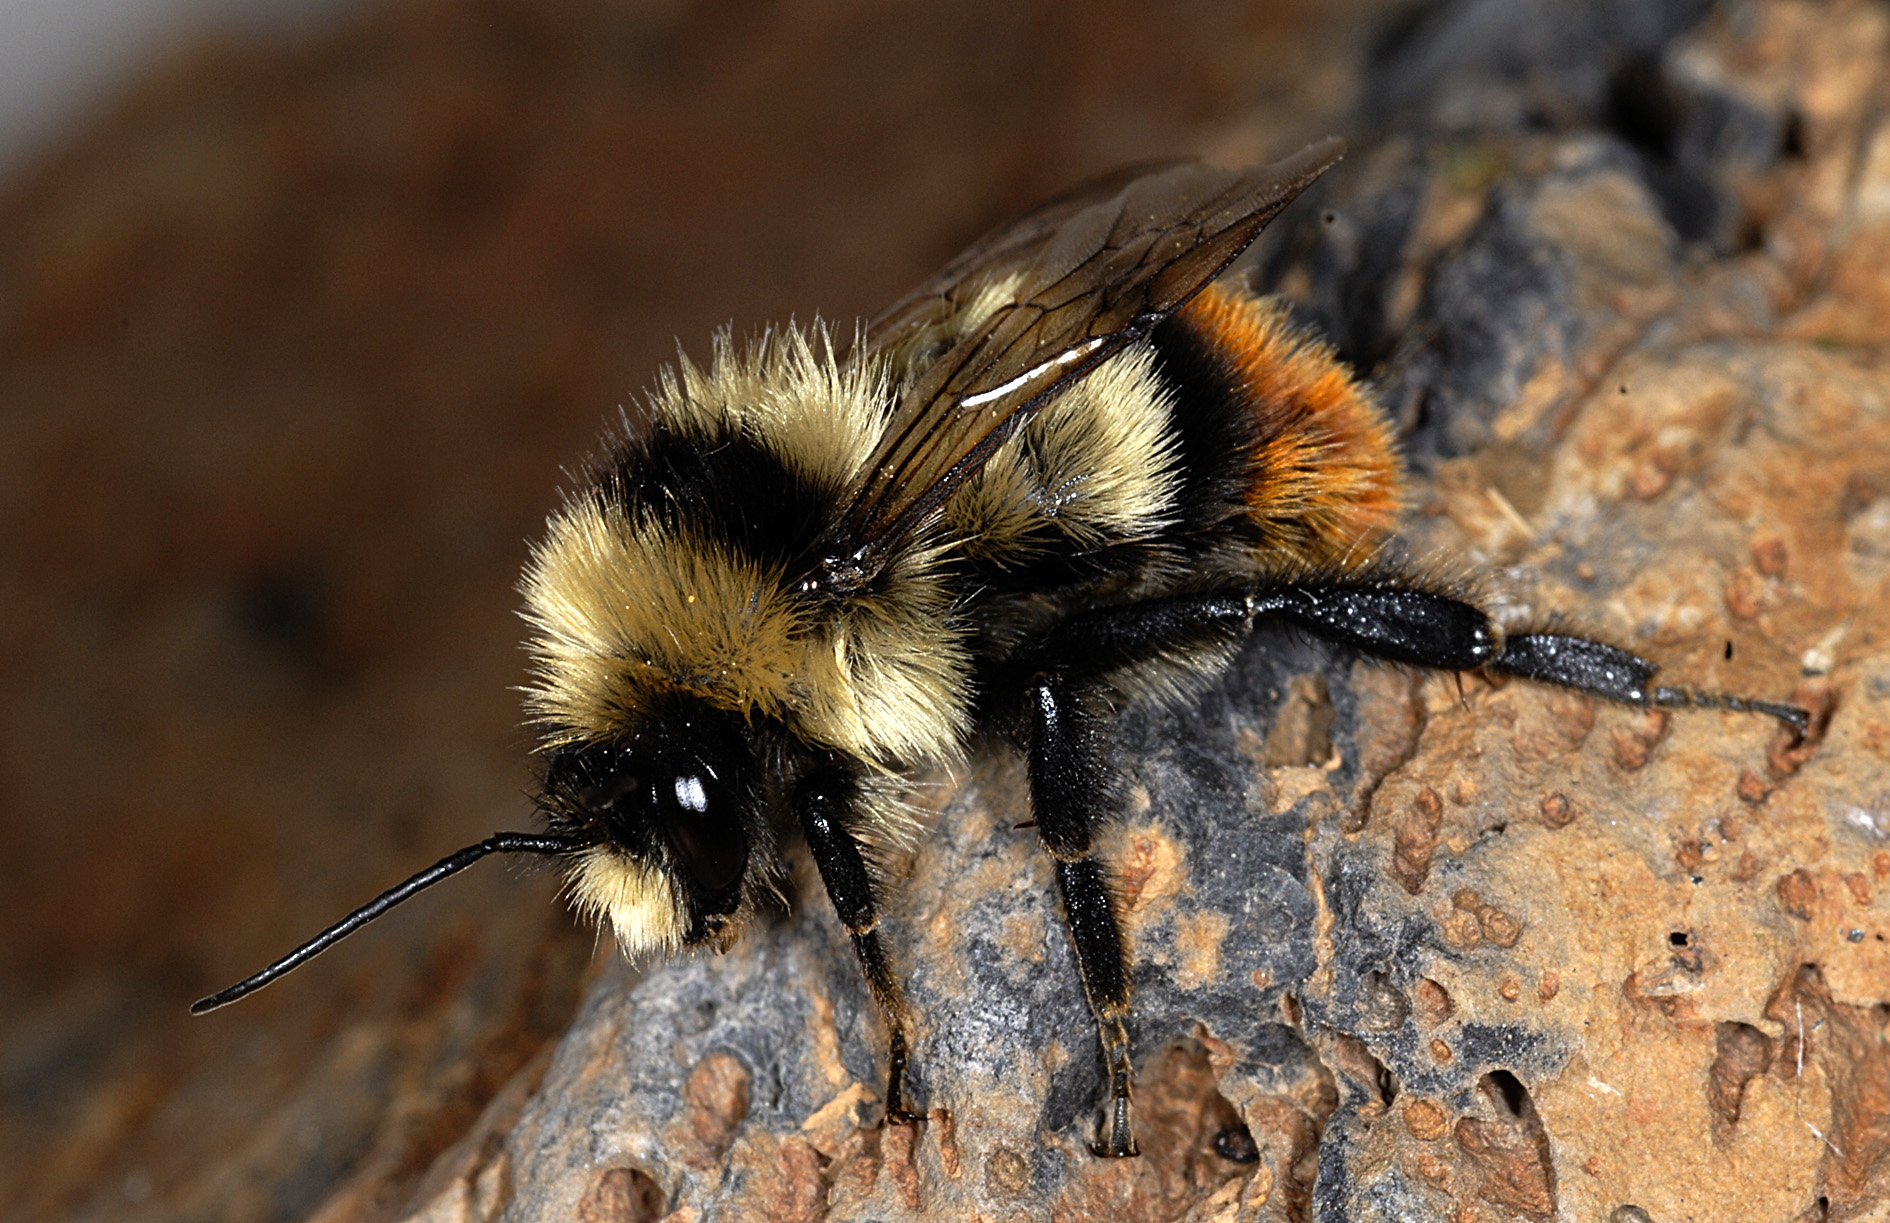 Changes in land use and agricultural practices that result in the loss of the species’ natural environment  represent a serious threat to many bumblebees in Europe